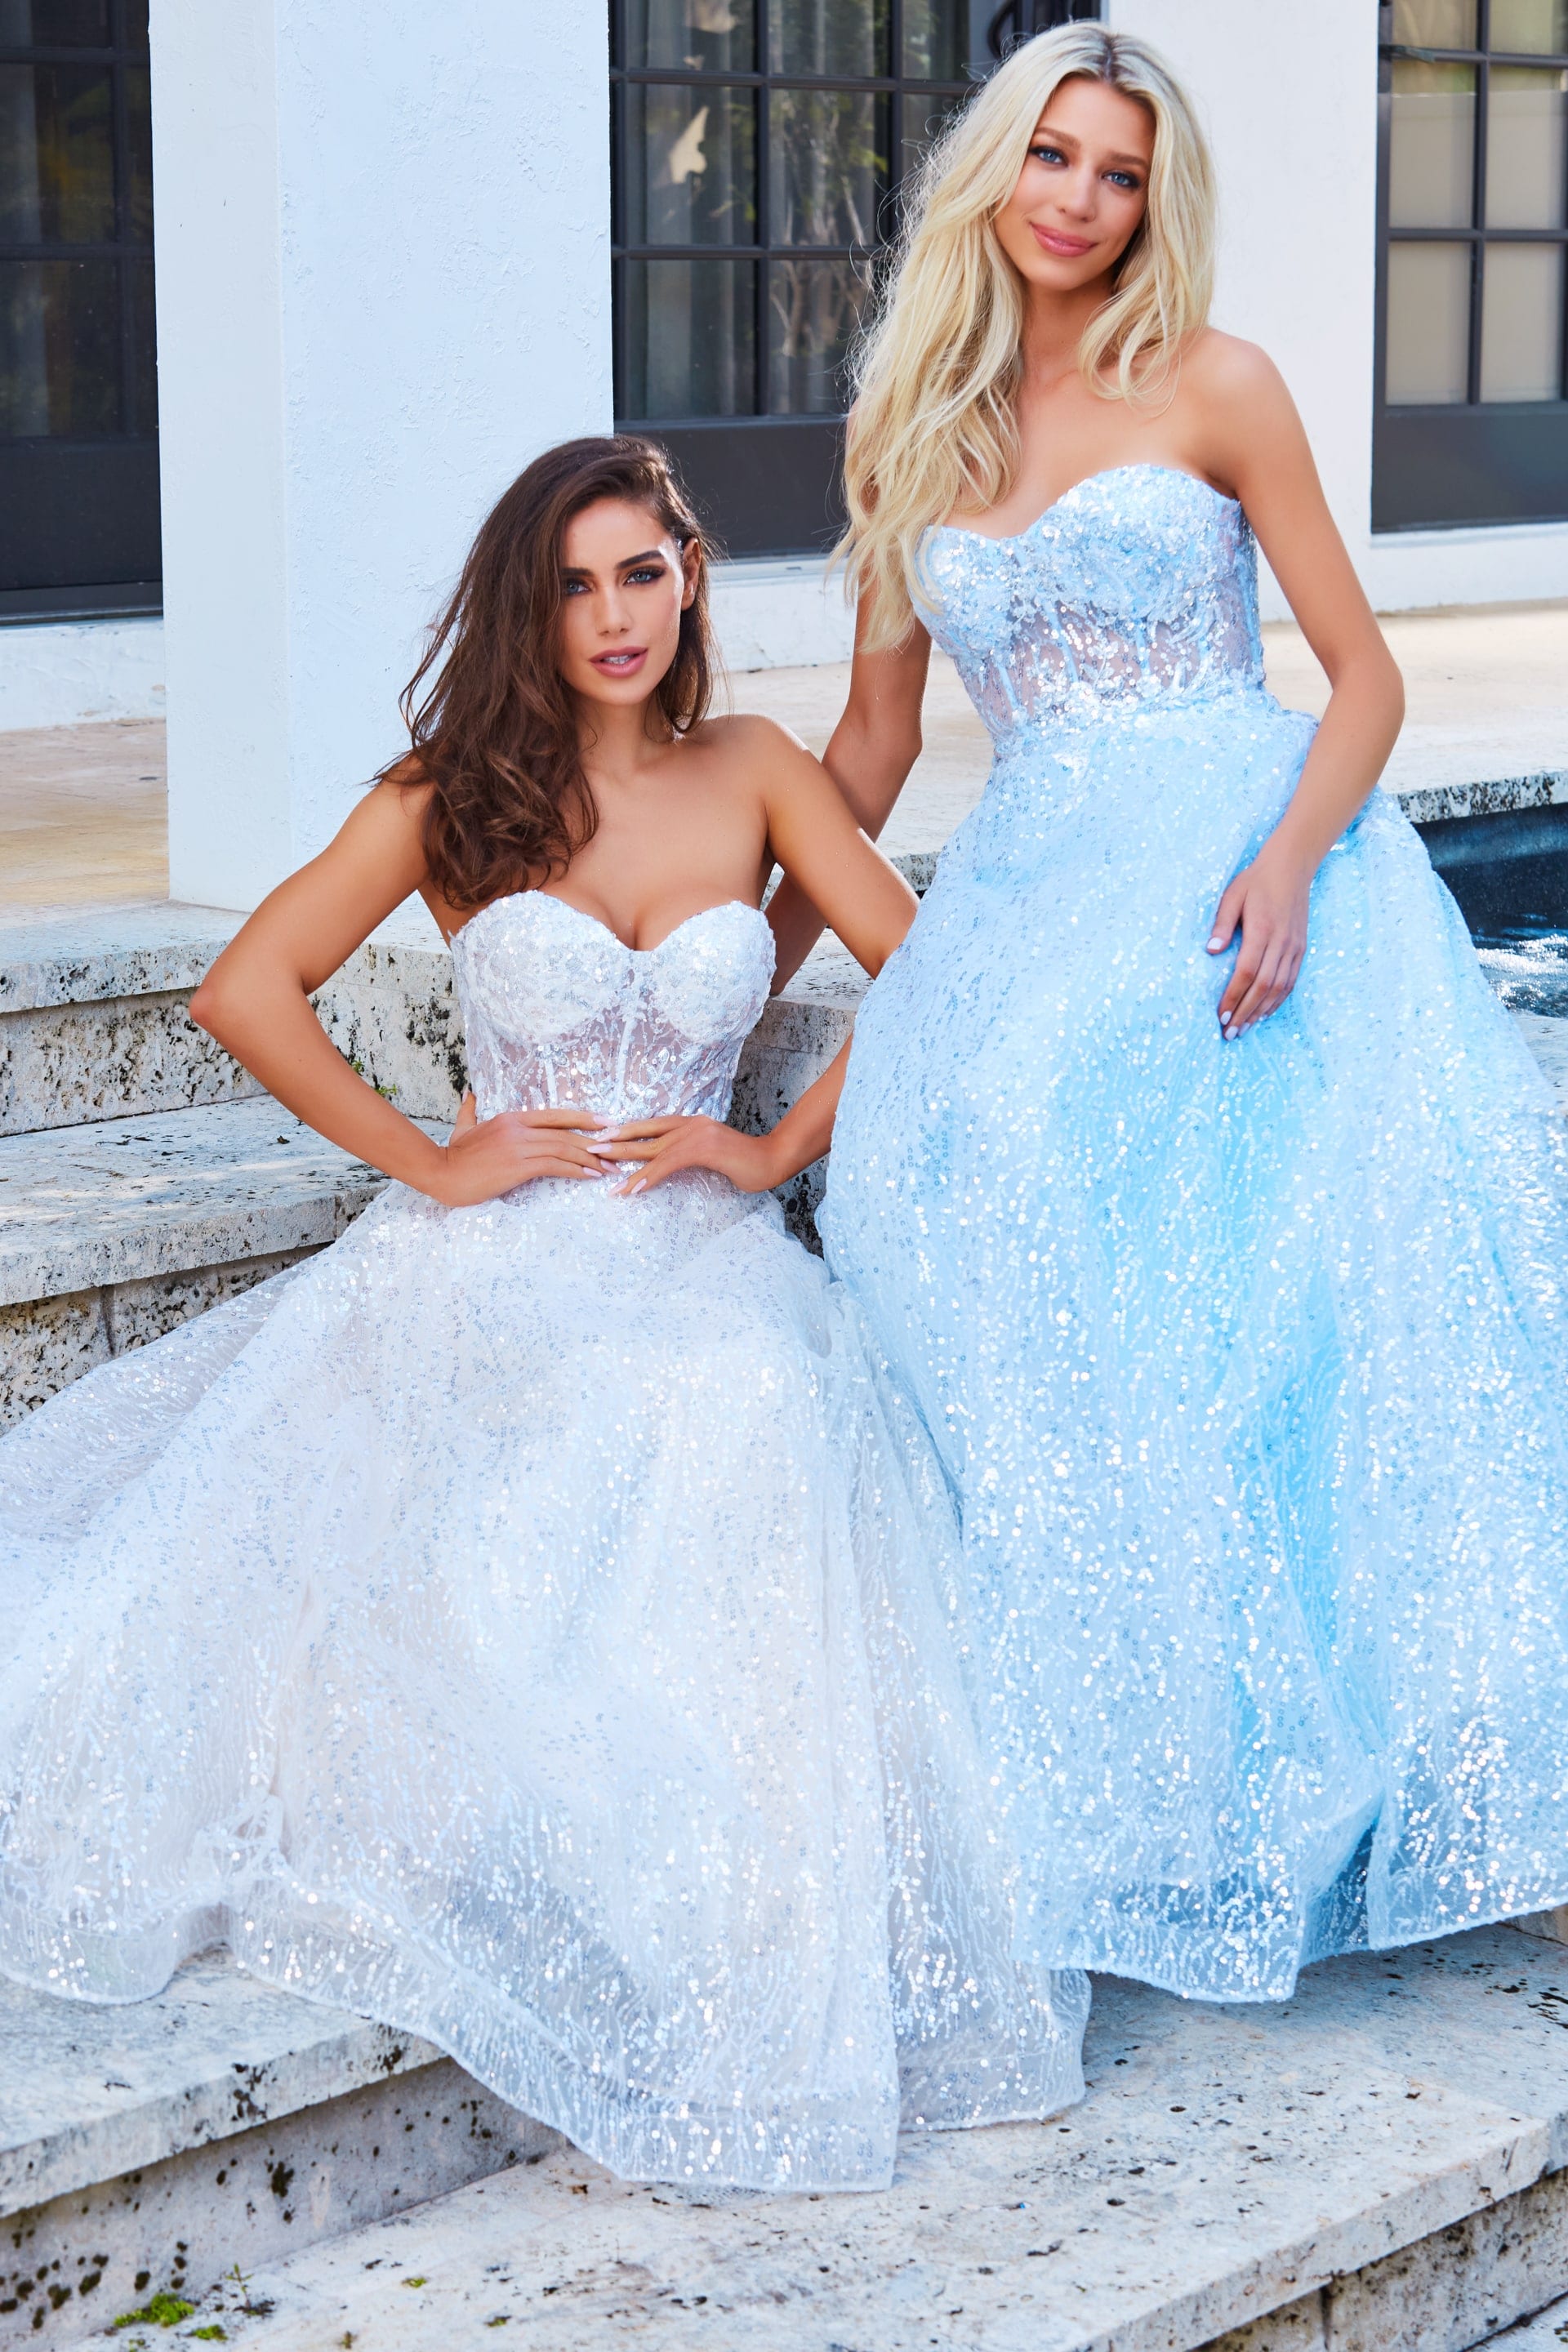 JVN08417 JVN08417 Lace Prom Dress Strapless Sweetheart Neckline Corset Bodice A Line.  The bodice on this lovely evening gown is sheer with embroidered lace. The exquisite gown has subtle sequins scattered on the long A line skirt.  